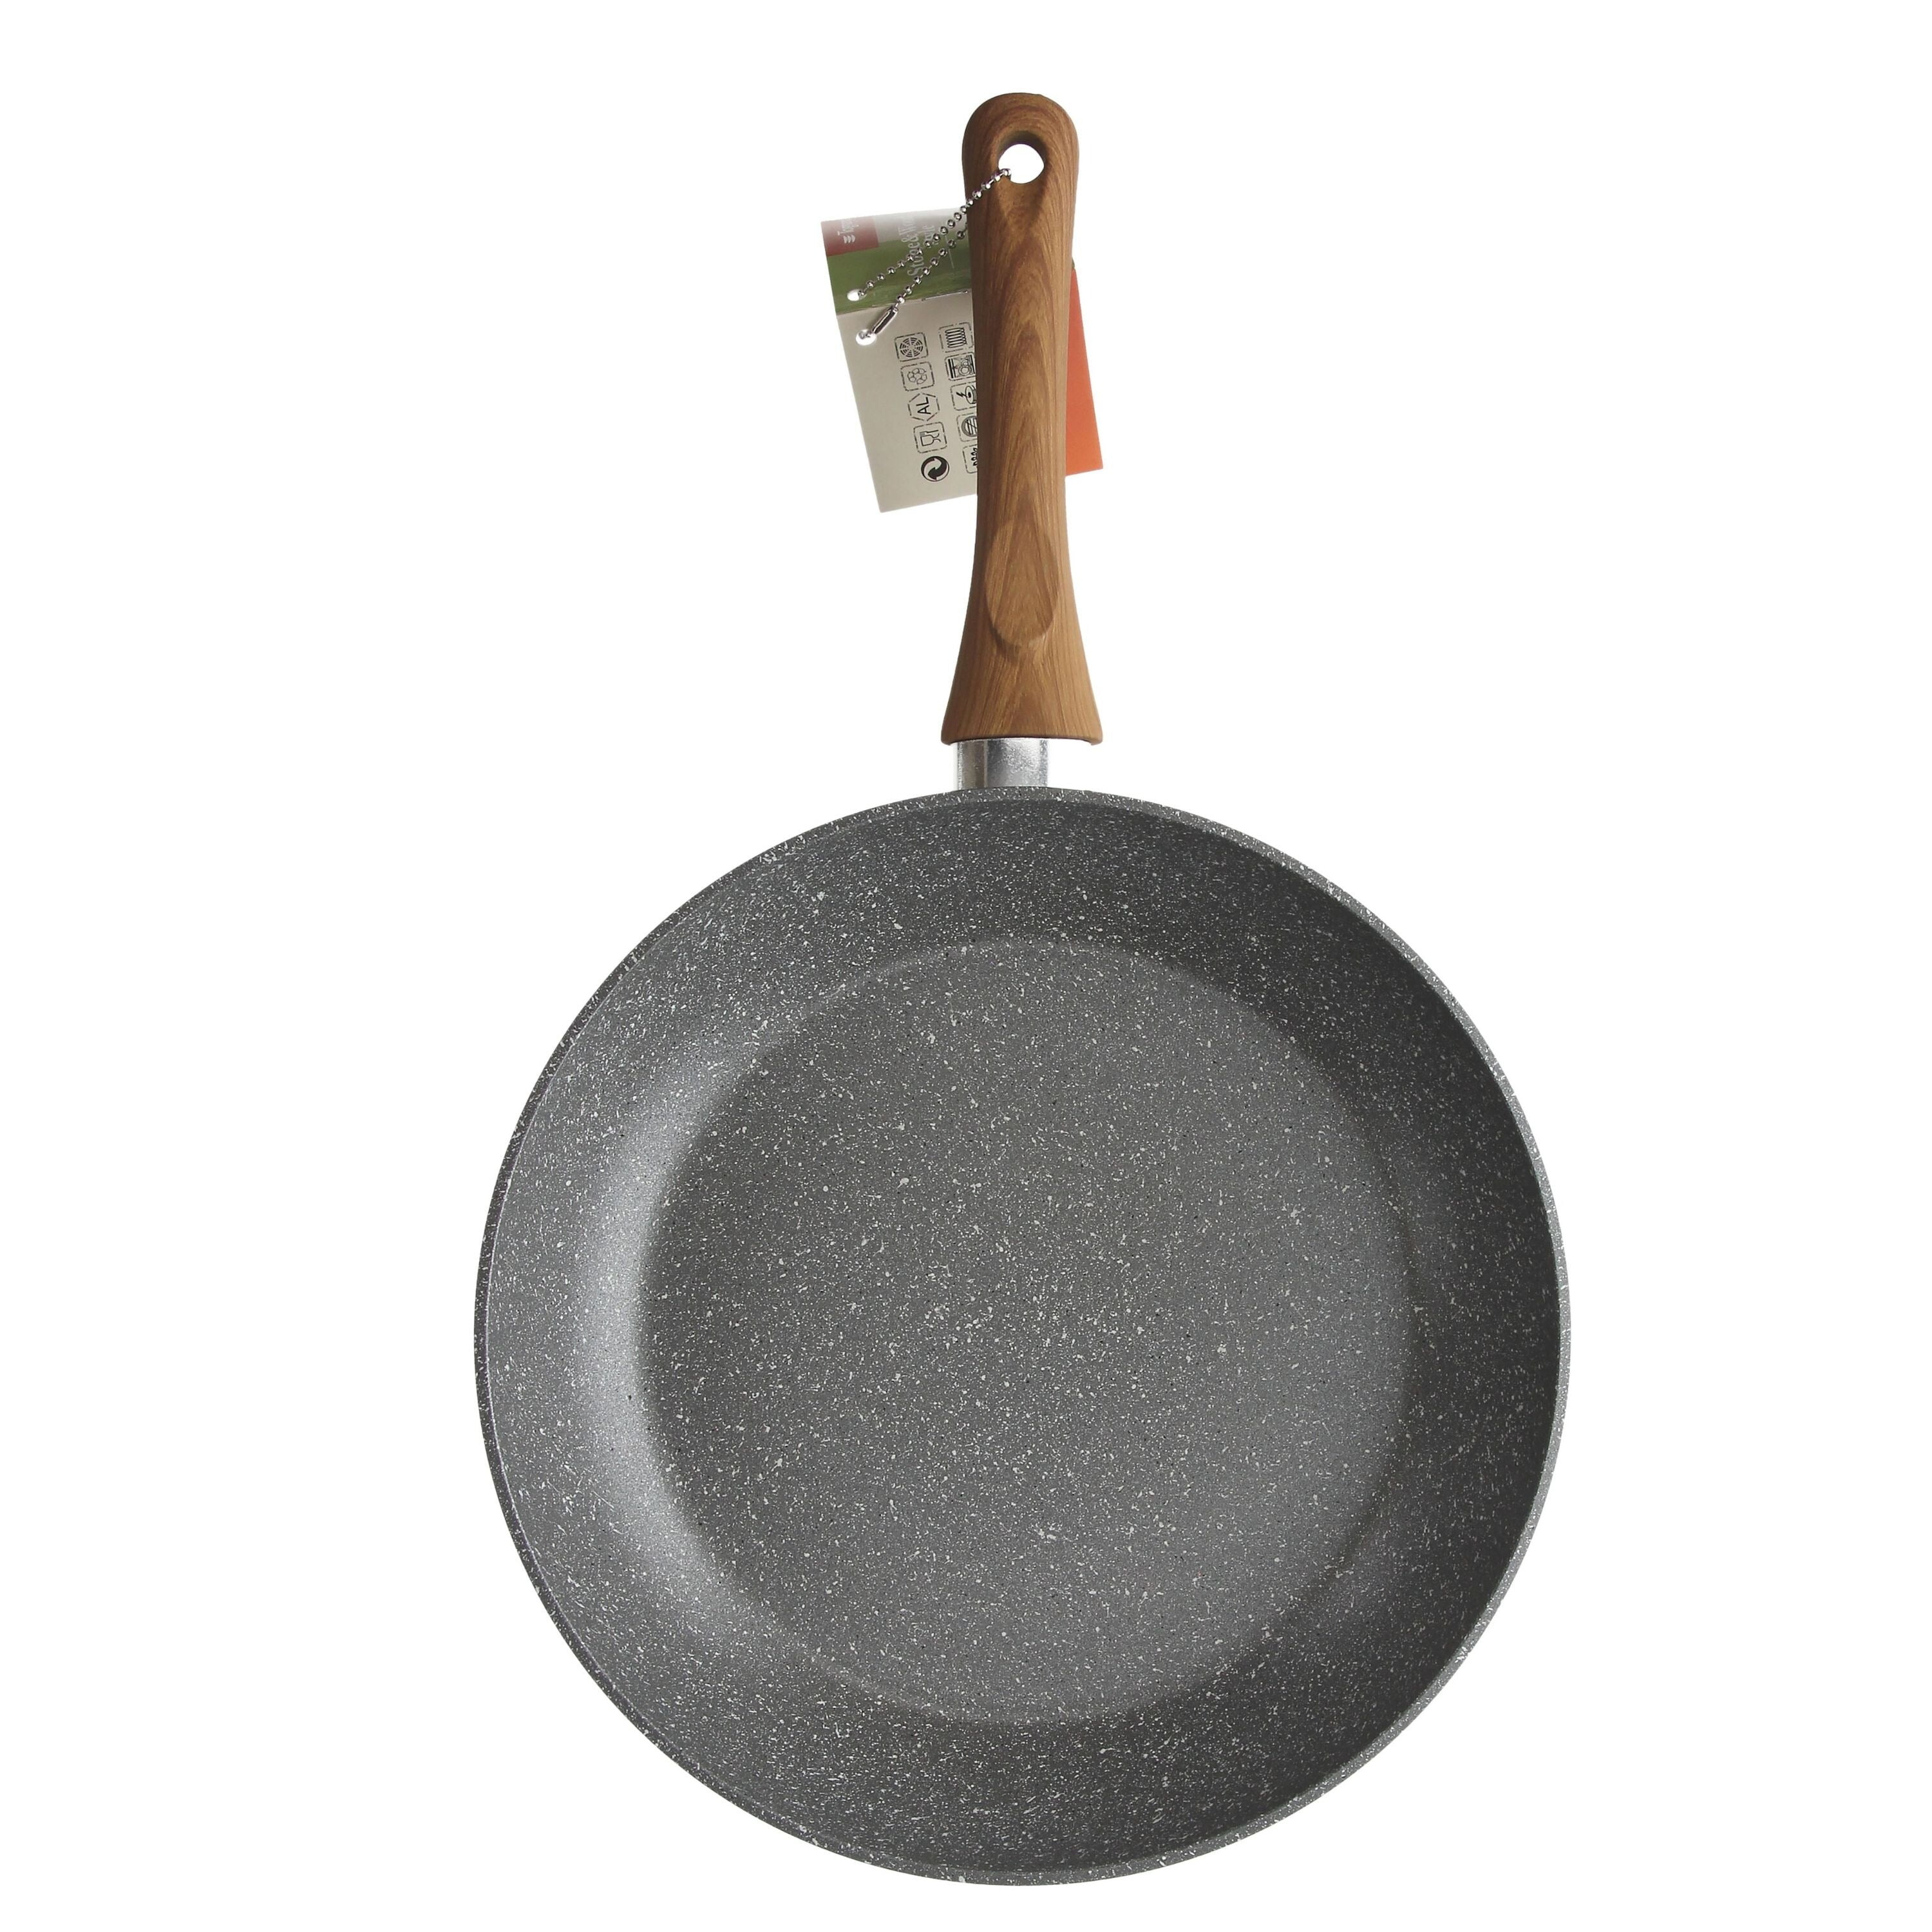 Wood & Stone Style Fry Pan 11 inch 